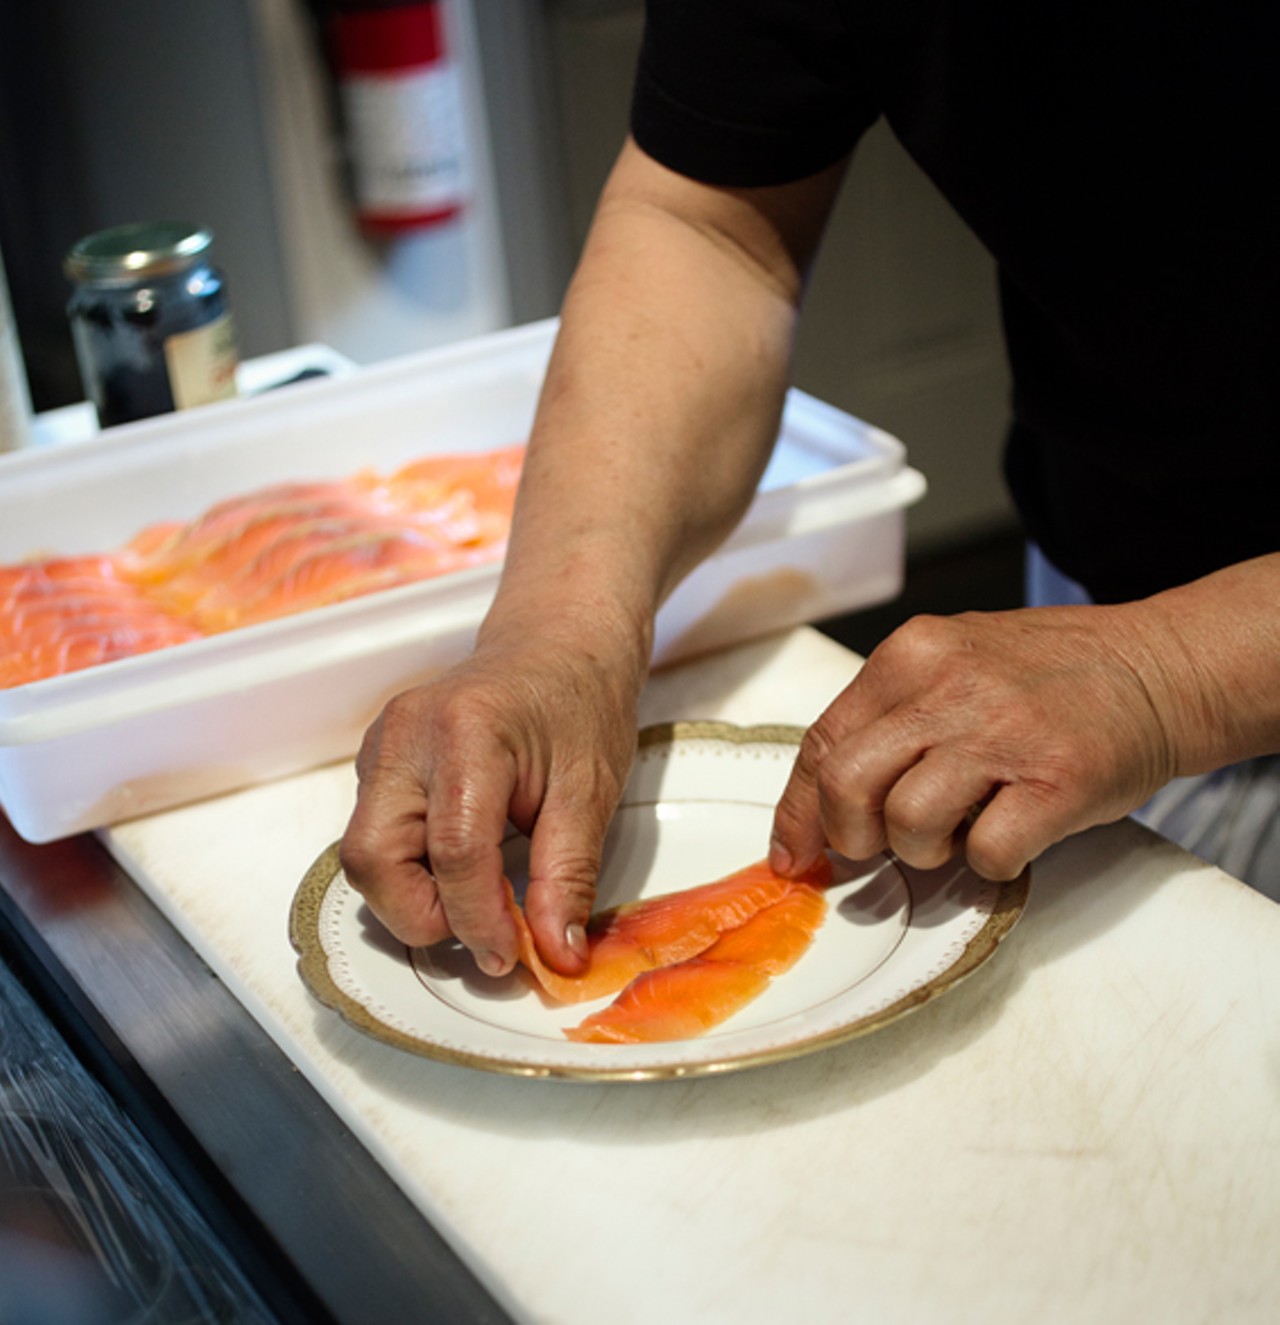 Exec chef Ny Vongsaly preparing the cured salmon.